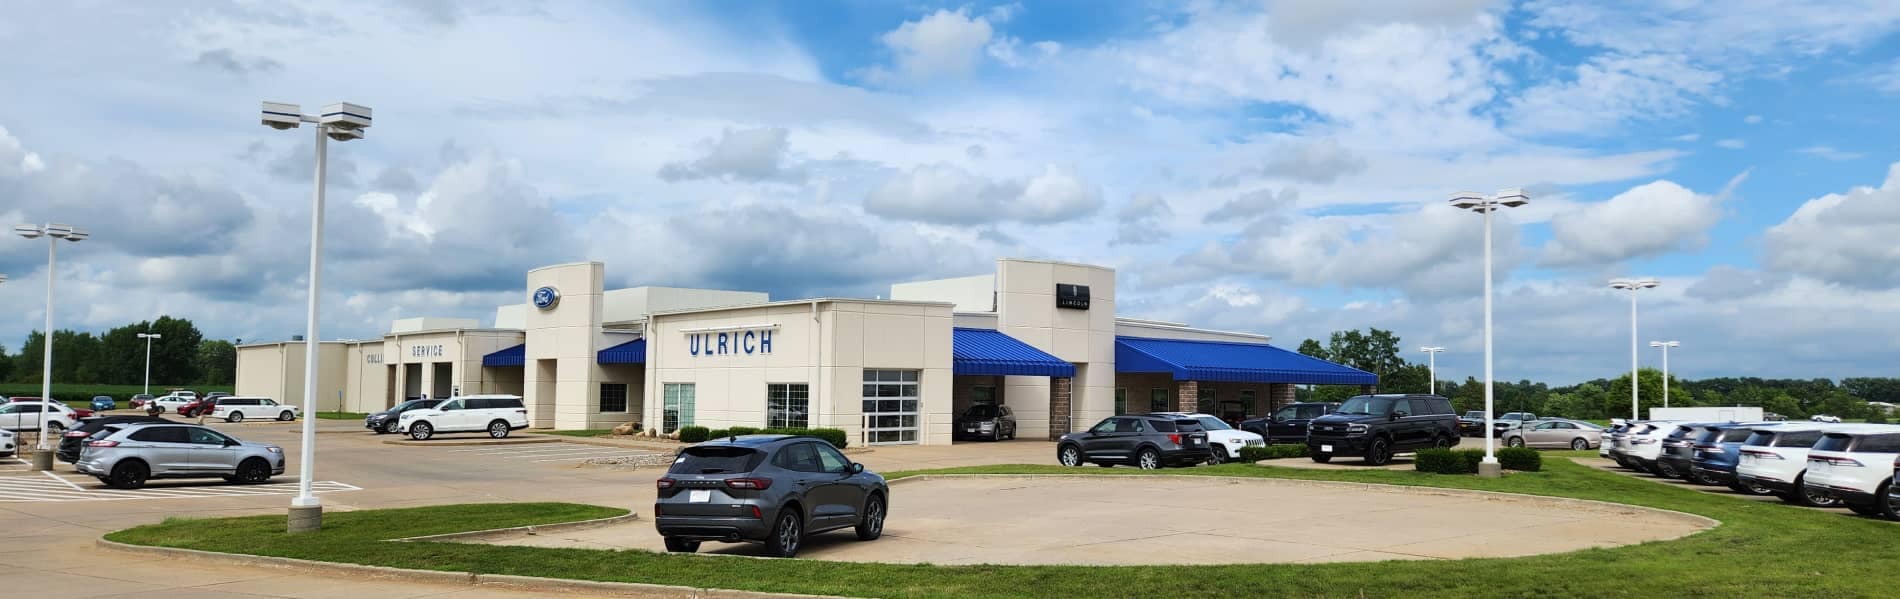 Ulrich Ford dealership front